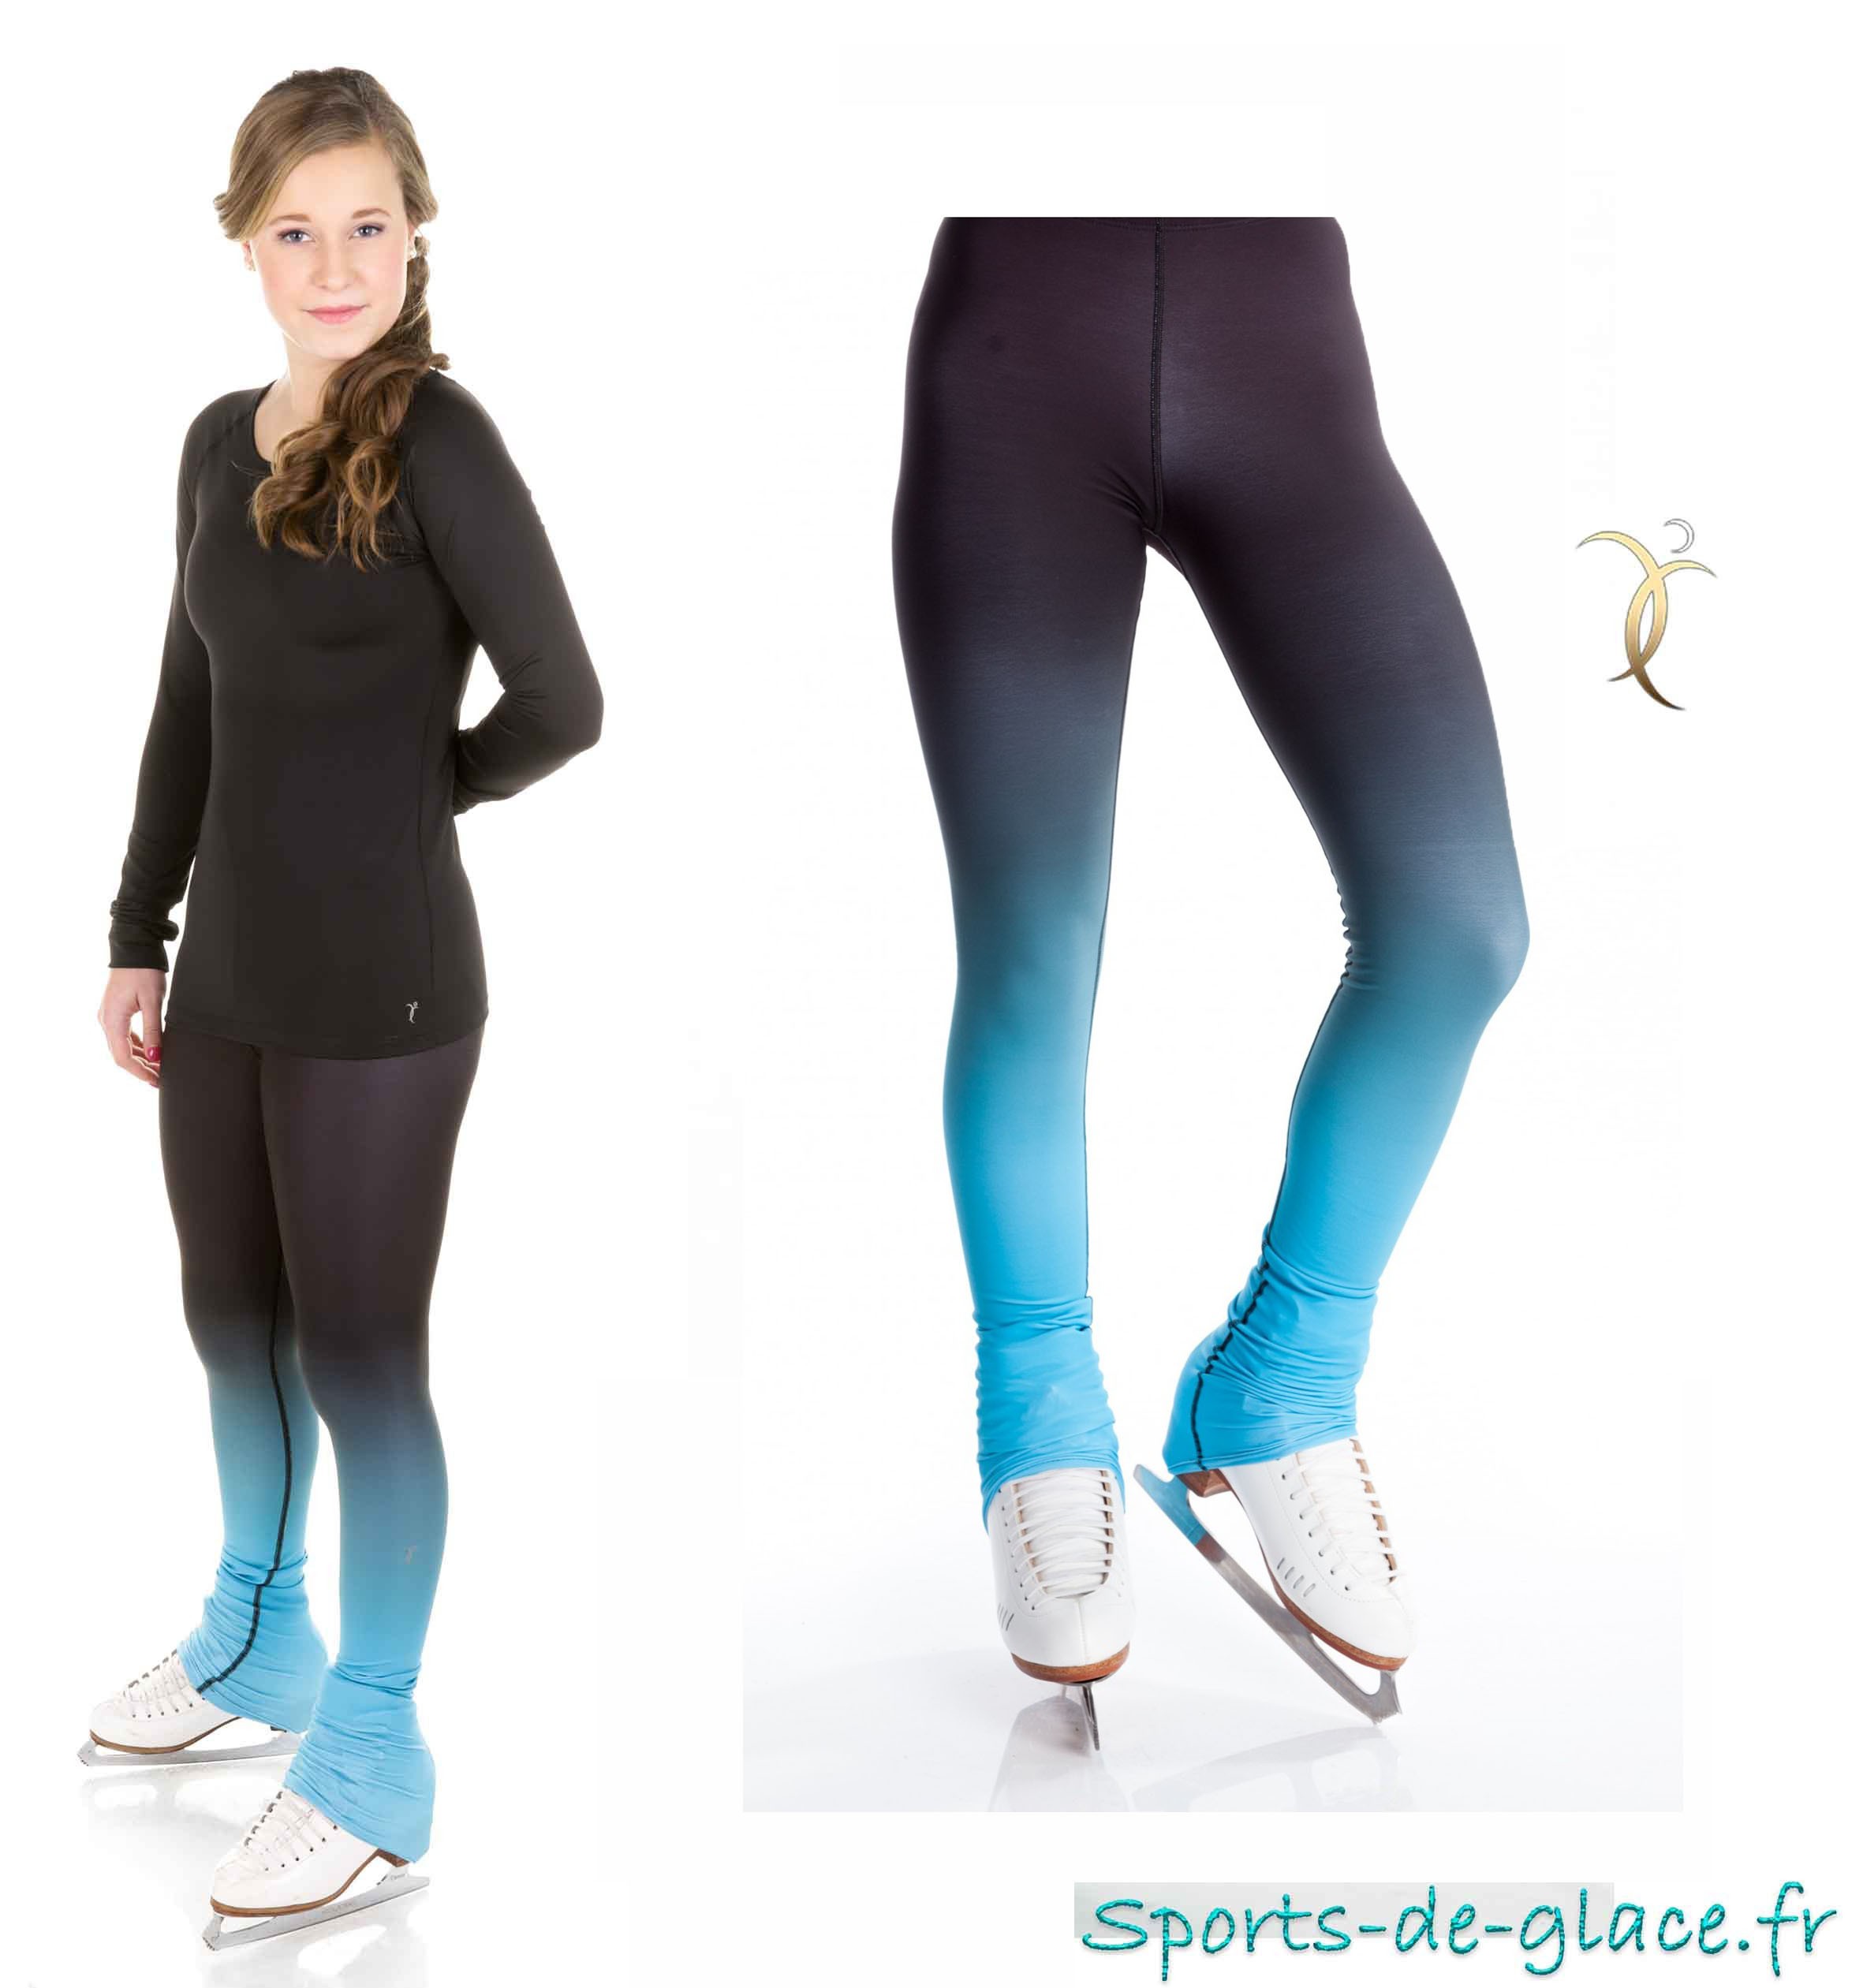 Faded Blue legging for ice skating practice - SPORTS DE GLACE France